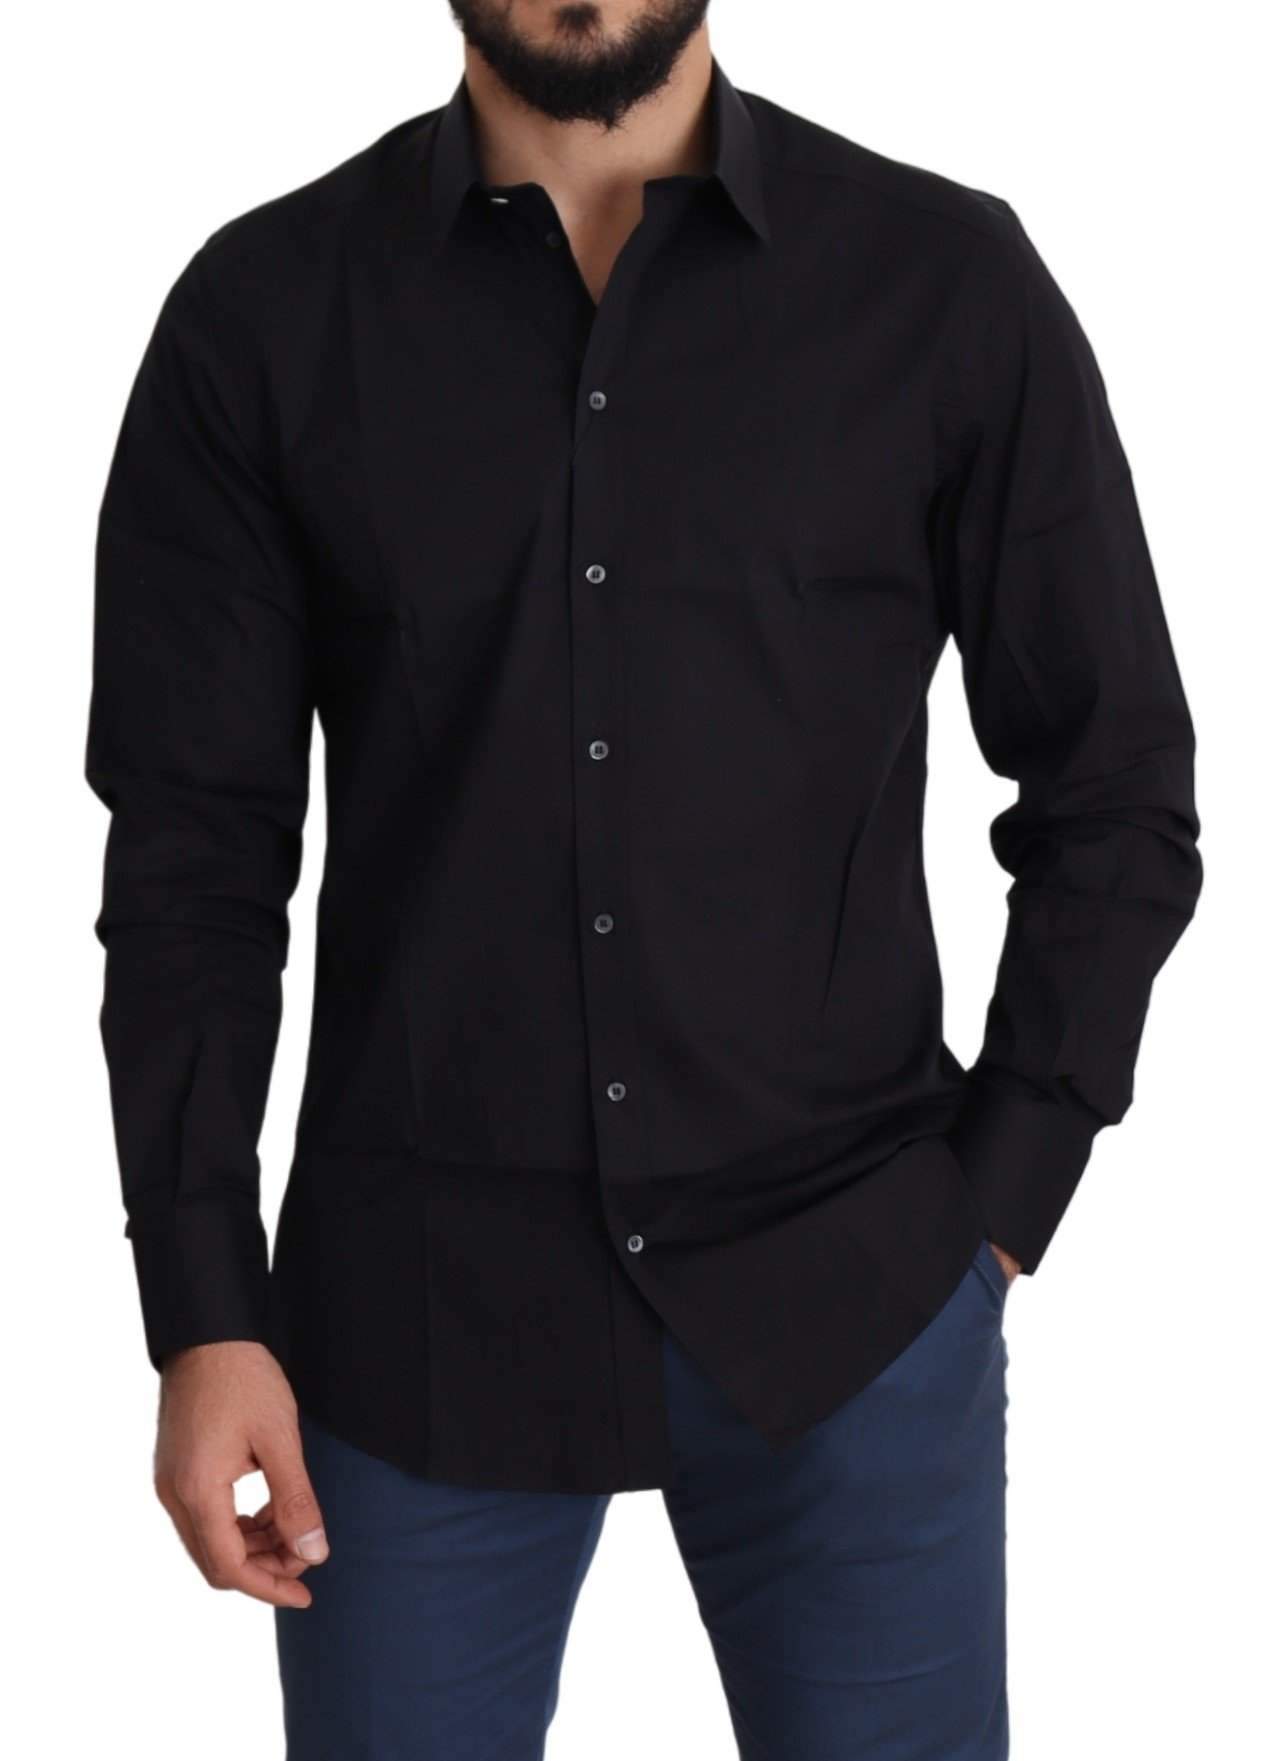 Dolce & Gabbana Black Cotton Stretch Formal GOLD Dress Shirt #men, Black, Brand_Dolce & Gabbana, Dolce & Gabbana, feed-agegroup-adult, feed-color-black, feed-gender-male, feed-size-IT38 | XS, feed-size-IT41 | L, feed-size-IT43 | XL, Gender_Men, IT38 | XS, IT41 | L, IT42 | XL, IT43 | XL, Men - New Arrivals, Shirts - Men - Clothing at SEYMAYKA